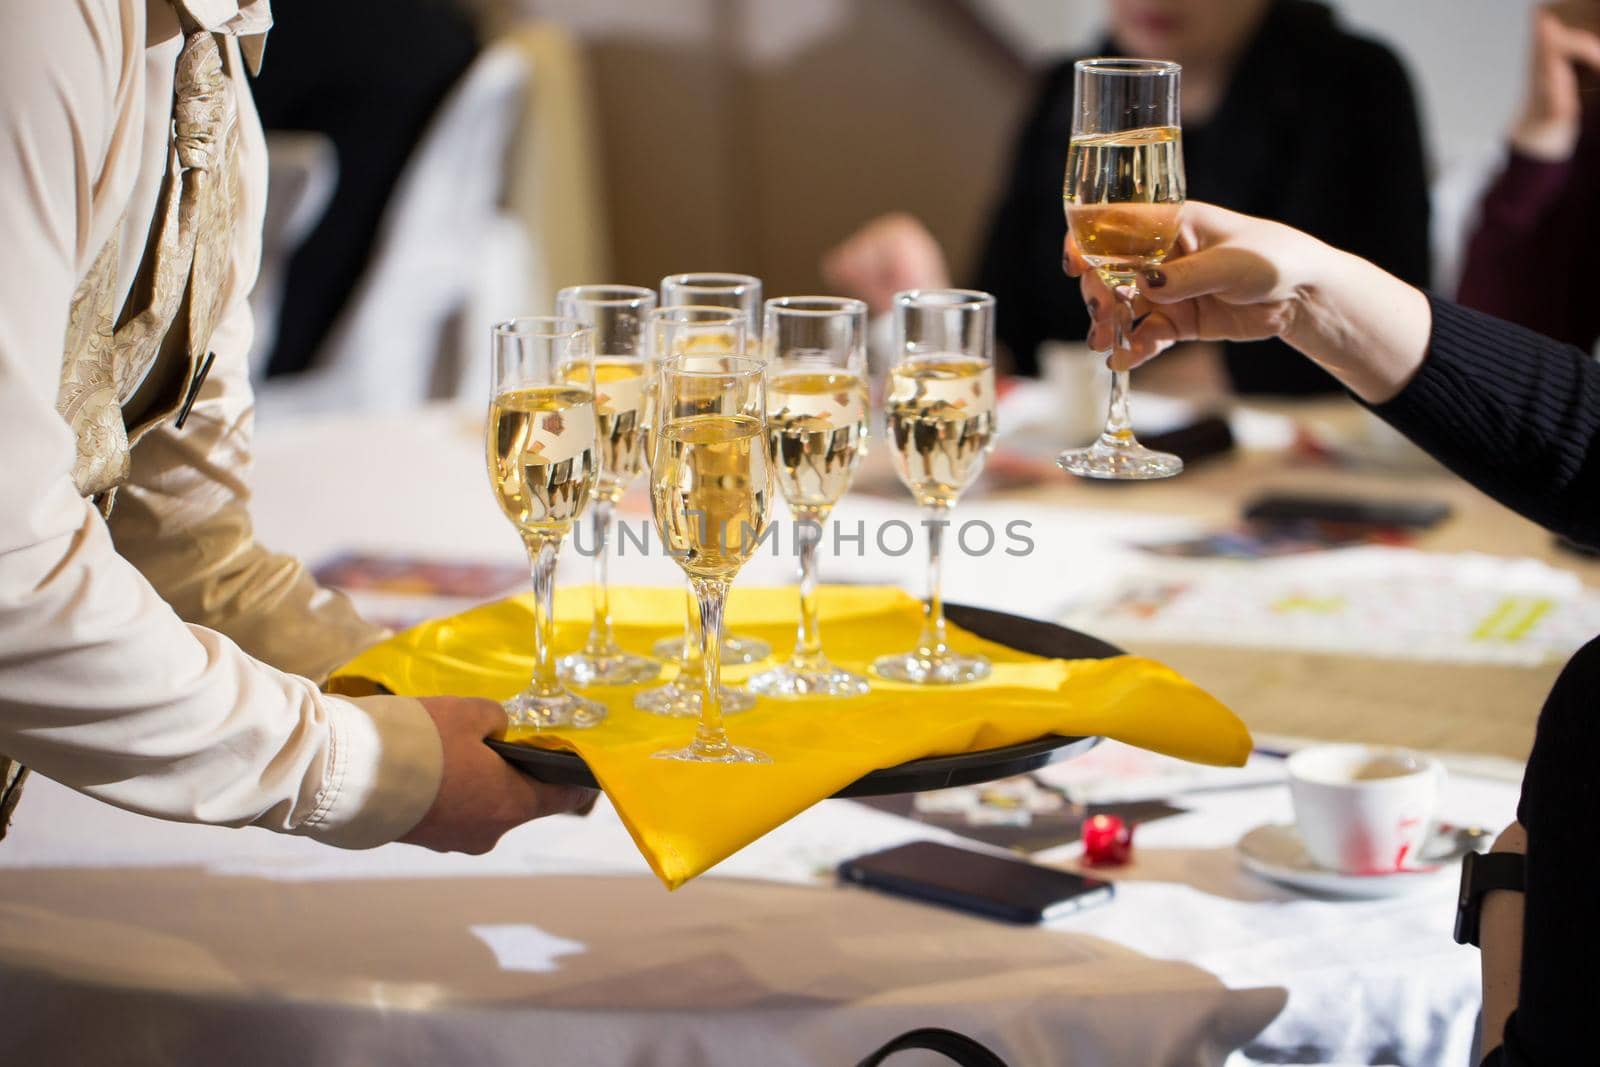 Waiter served champagne glasses on a tray in a fine dining restaurant and woman takes a glass. by StudioPeace